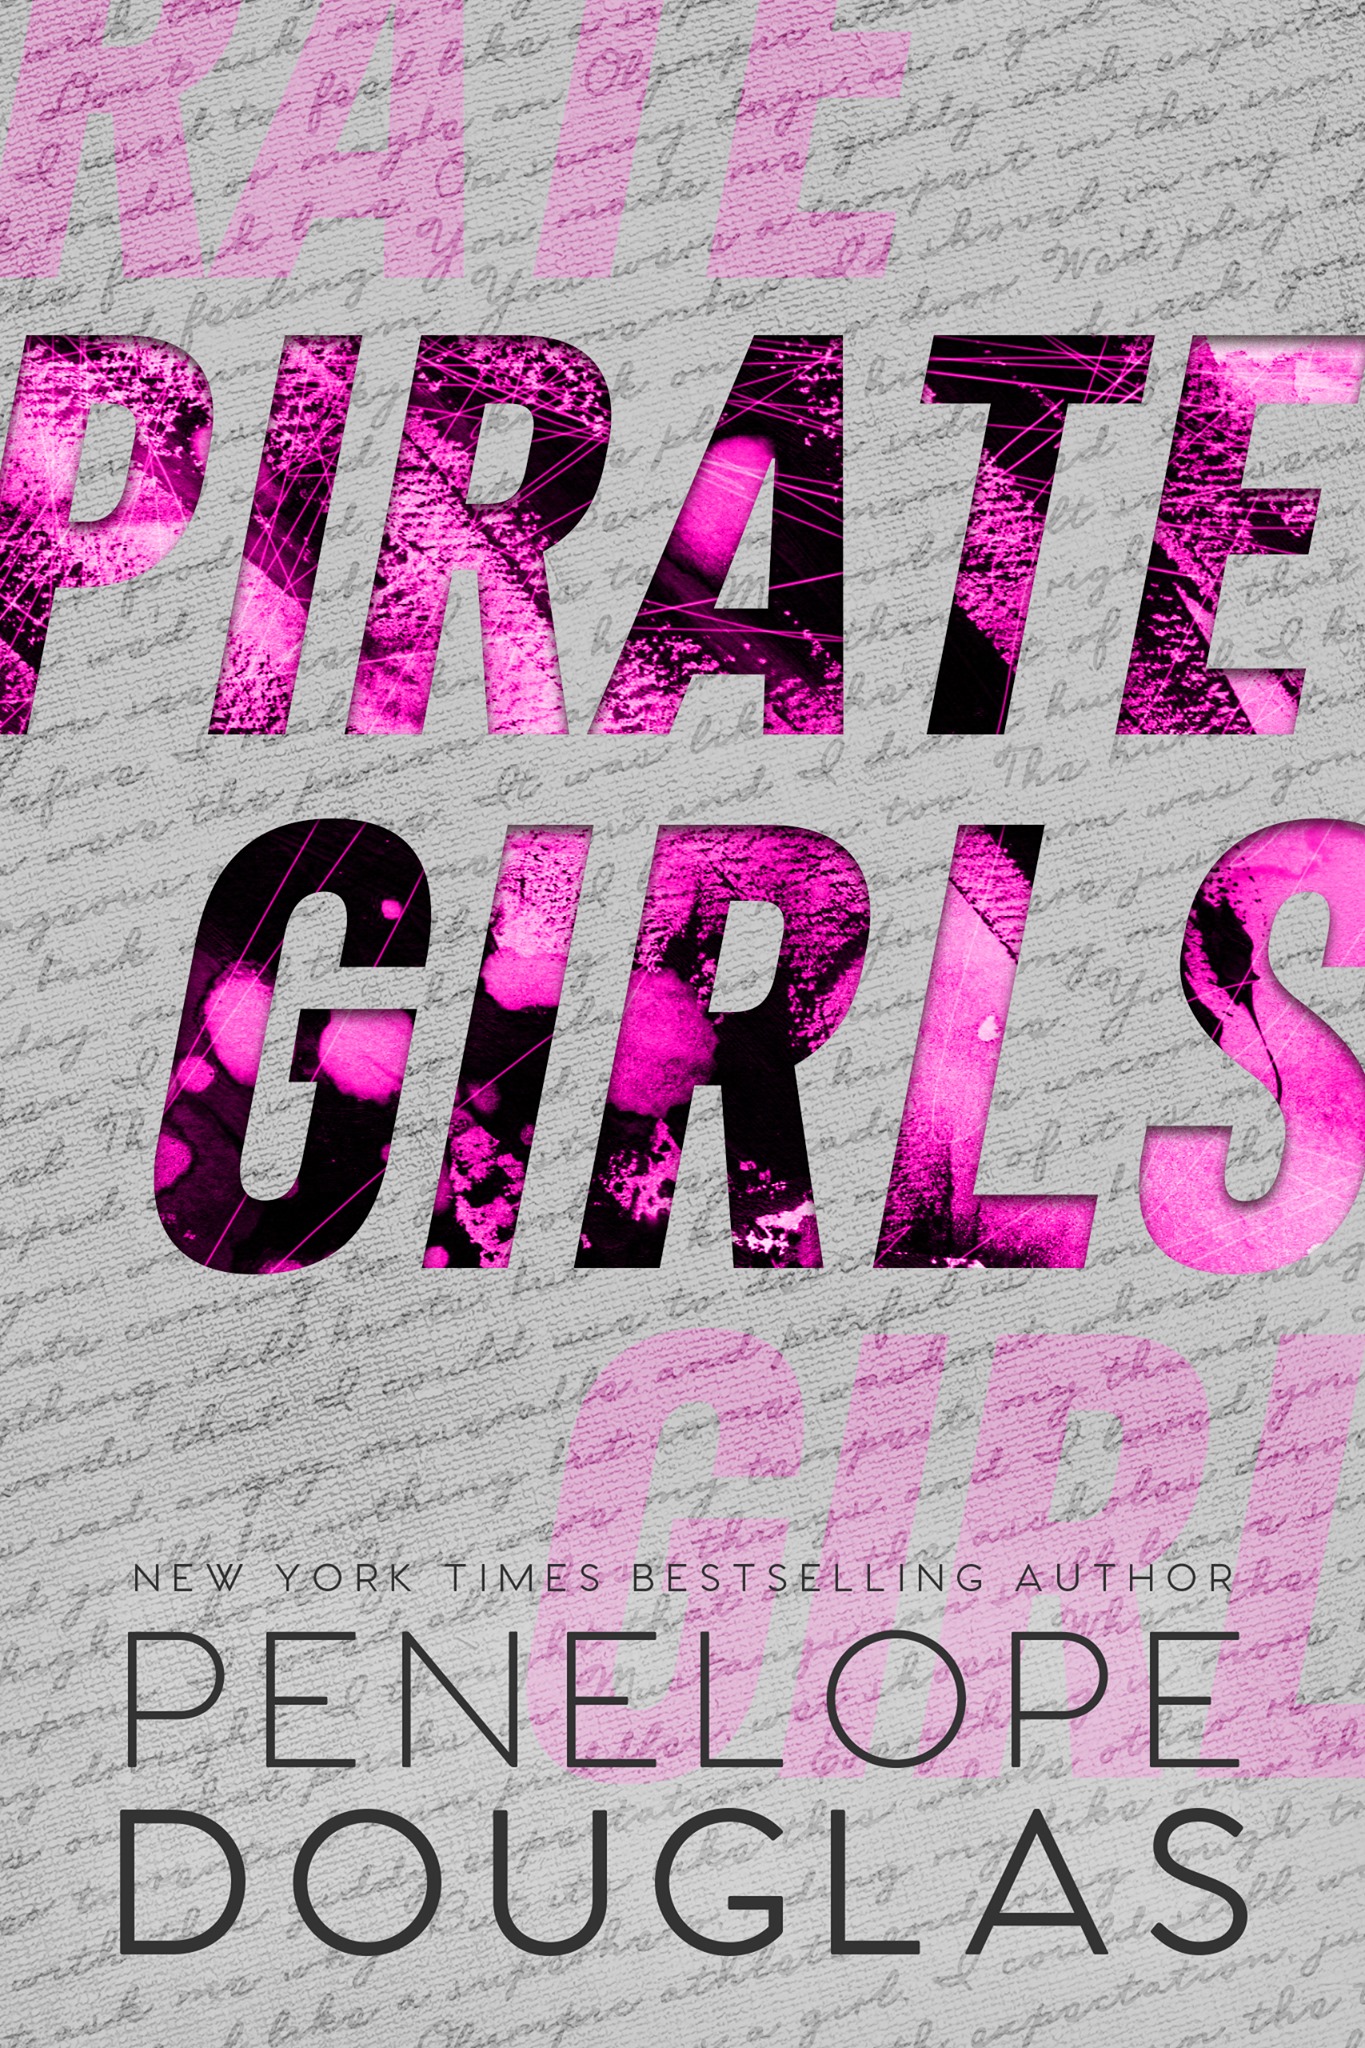 Publisher Little Brown Book Group - Hellbent 2:Pirate Girls - Penelope Douglas